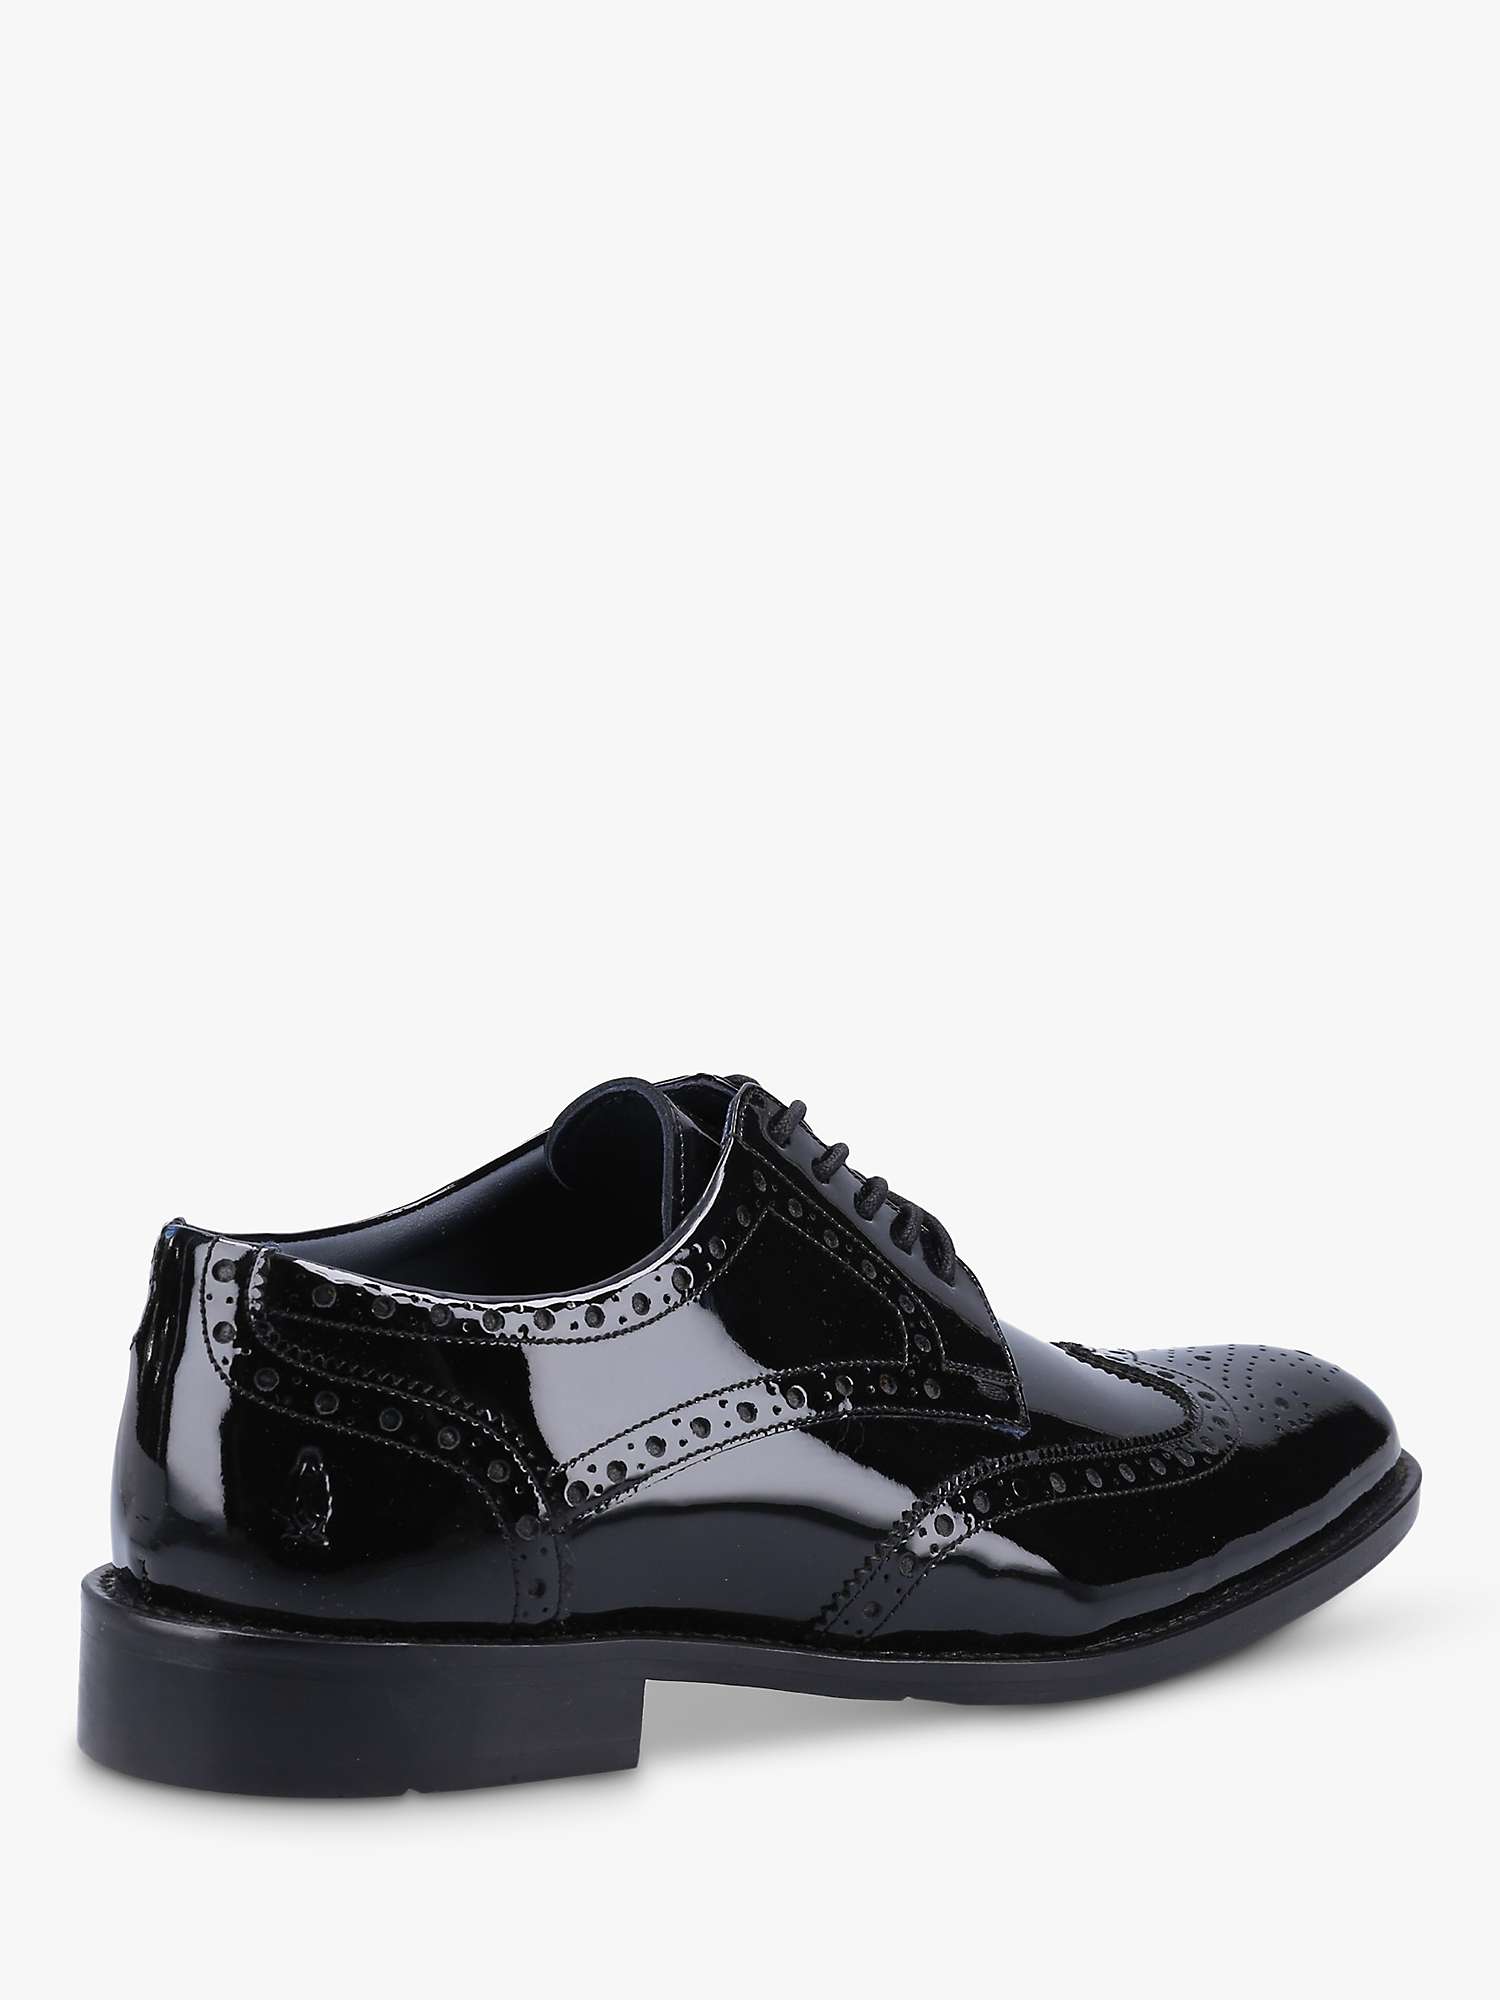 Buy Hush Puppies Dustin Patent Leather Brogues, Black Online at johnlewis.com